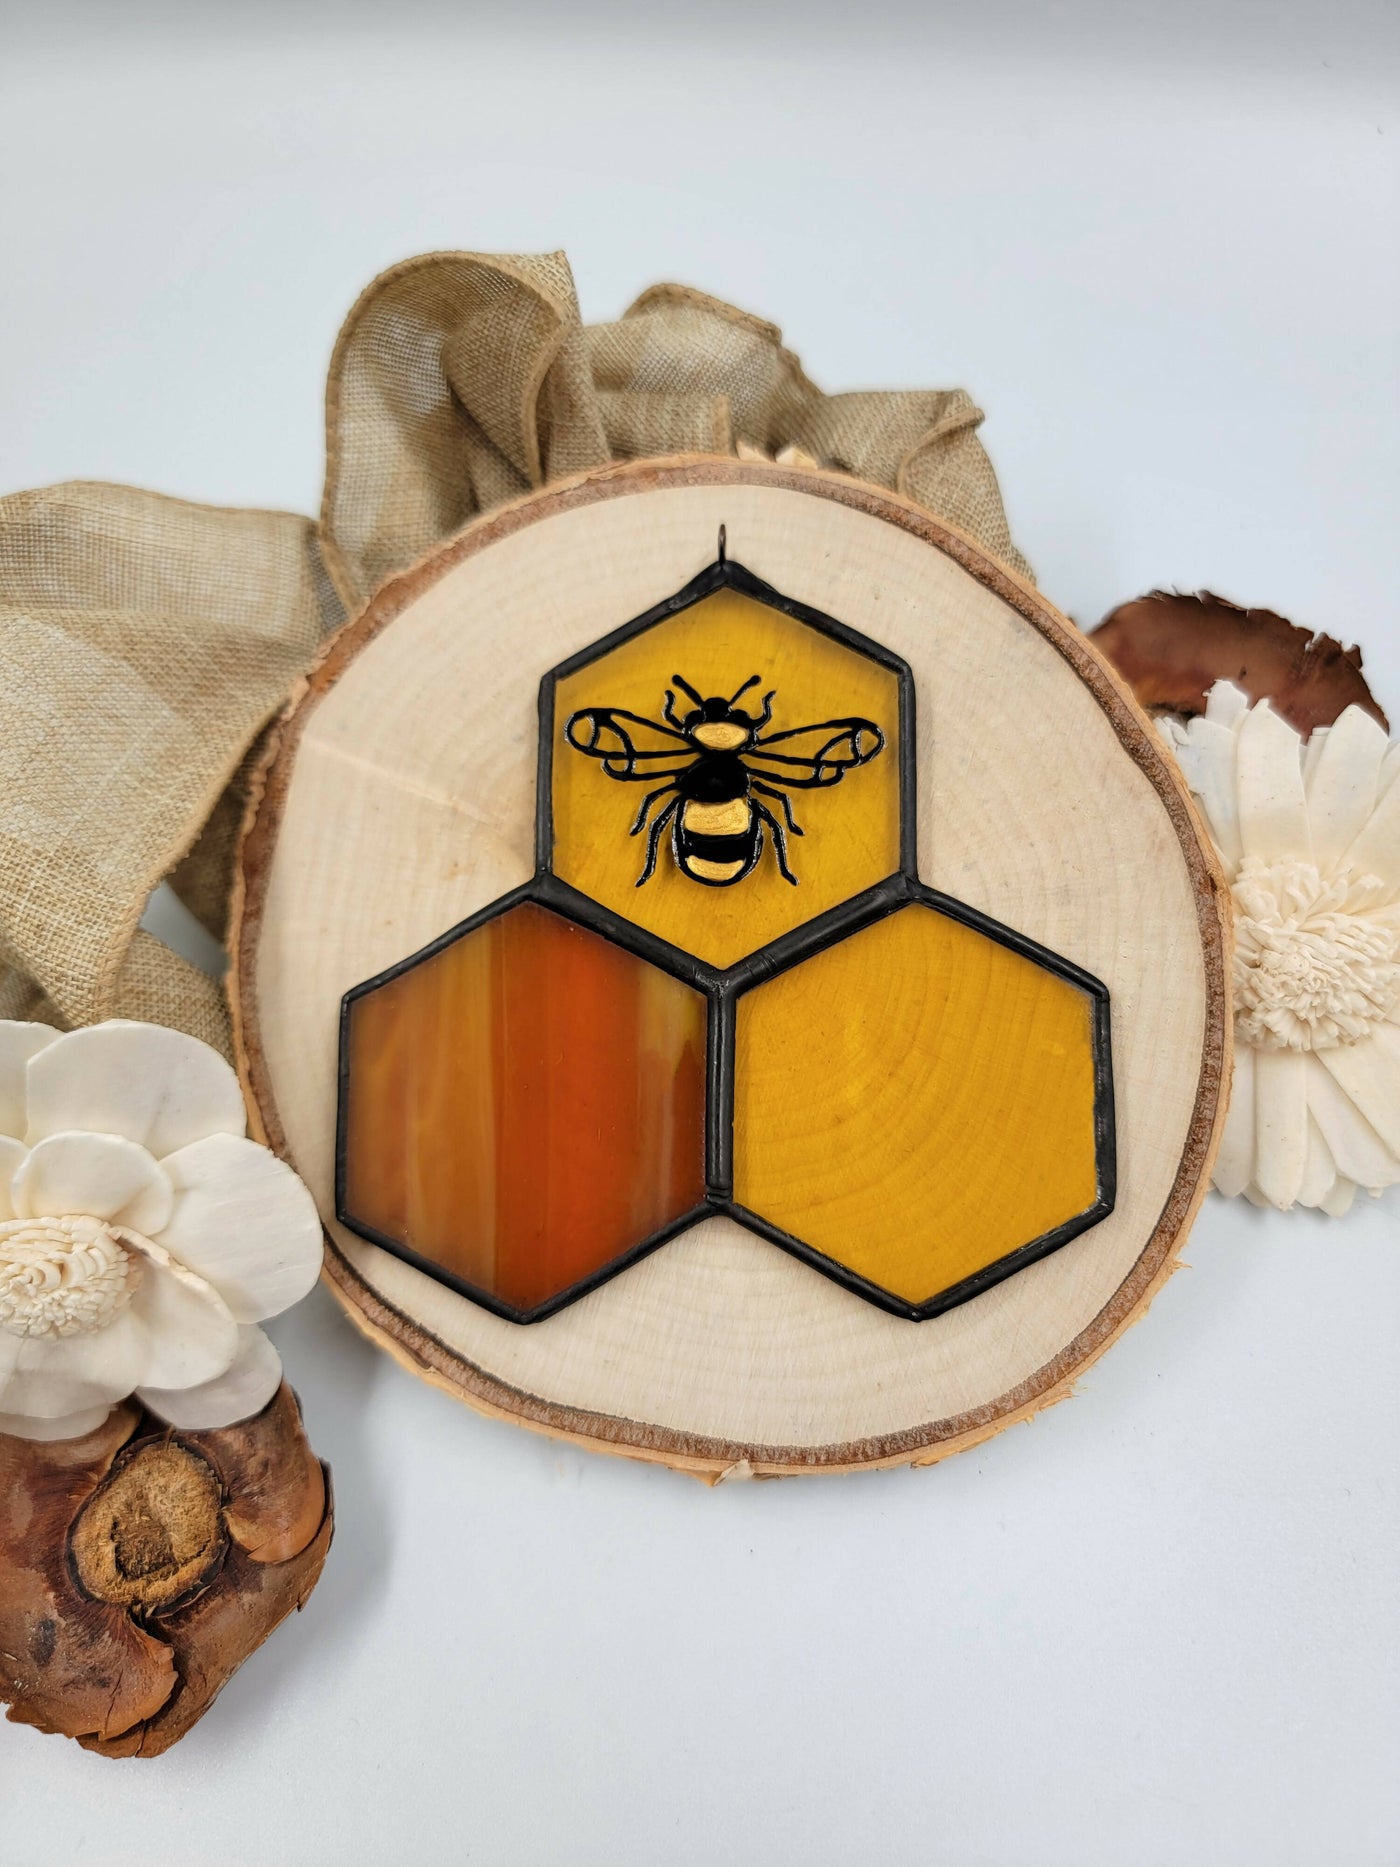 Stained glass honeycomb and bee ornament